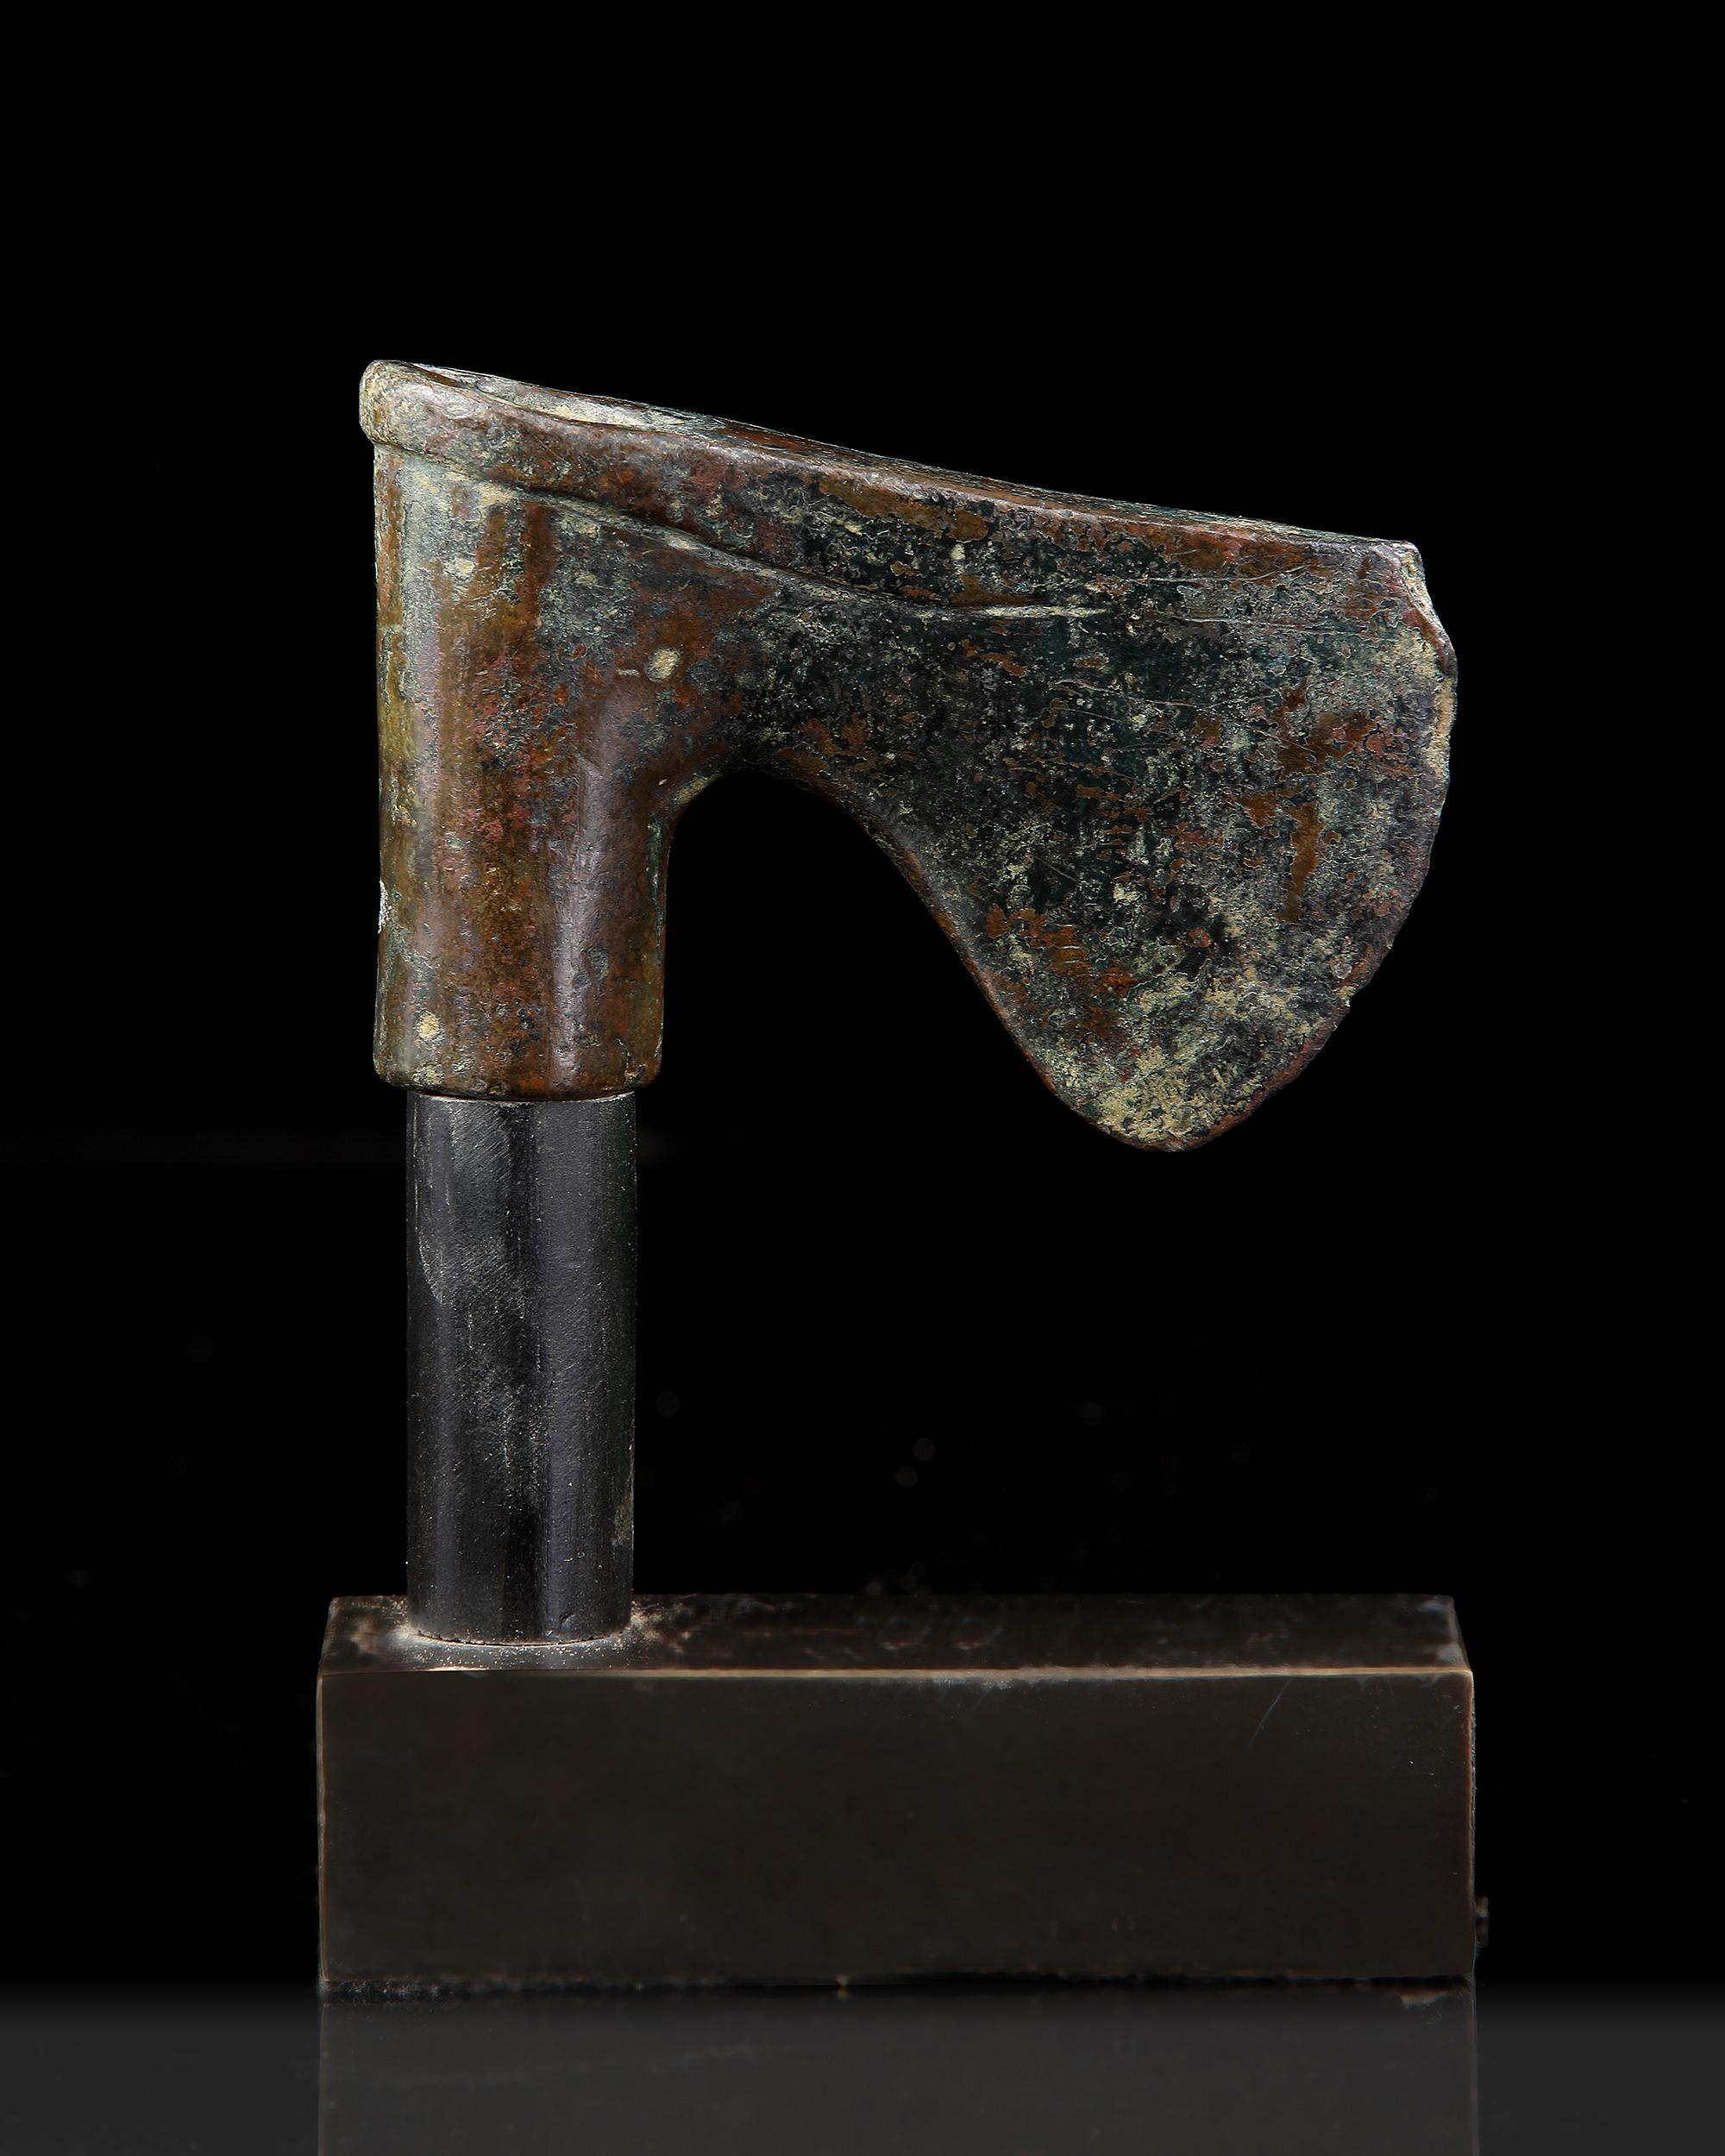 A GROUP OF WESTERN ASIATIC BRONZE AXE HEADS, CIRCA 3RD-2ND MILLENNIUM B.C. - Image 4 of 6